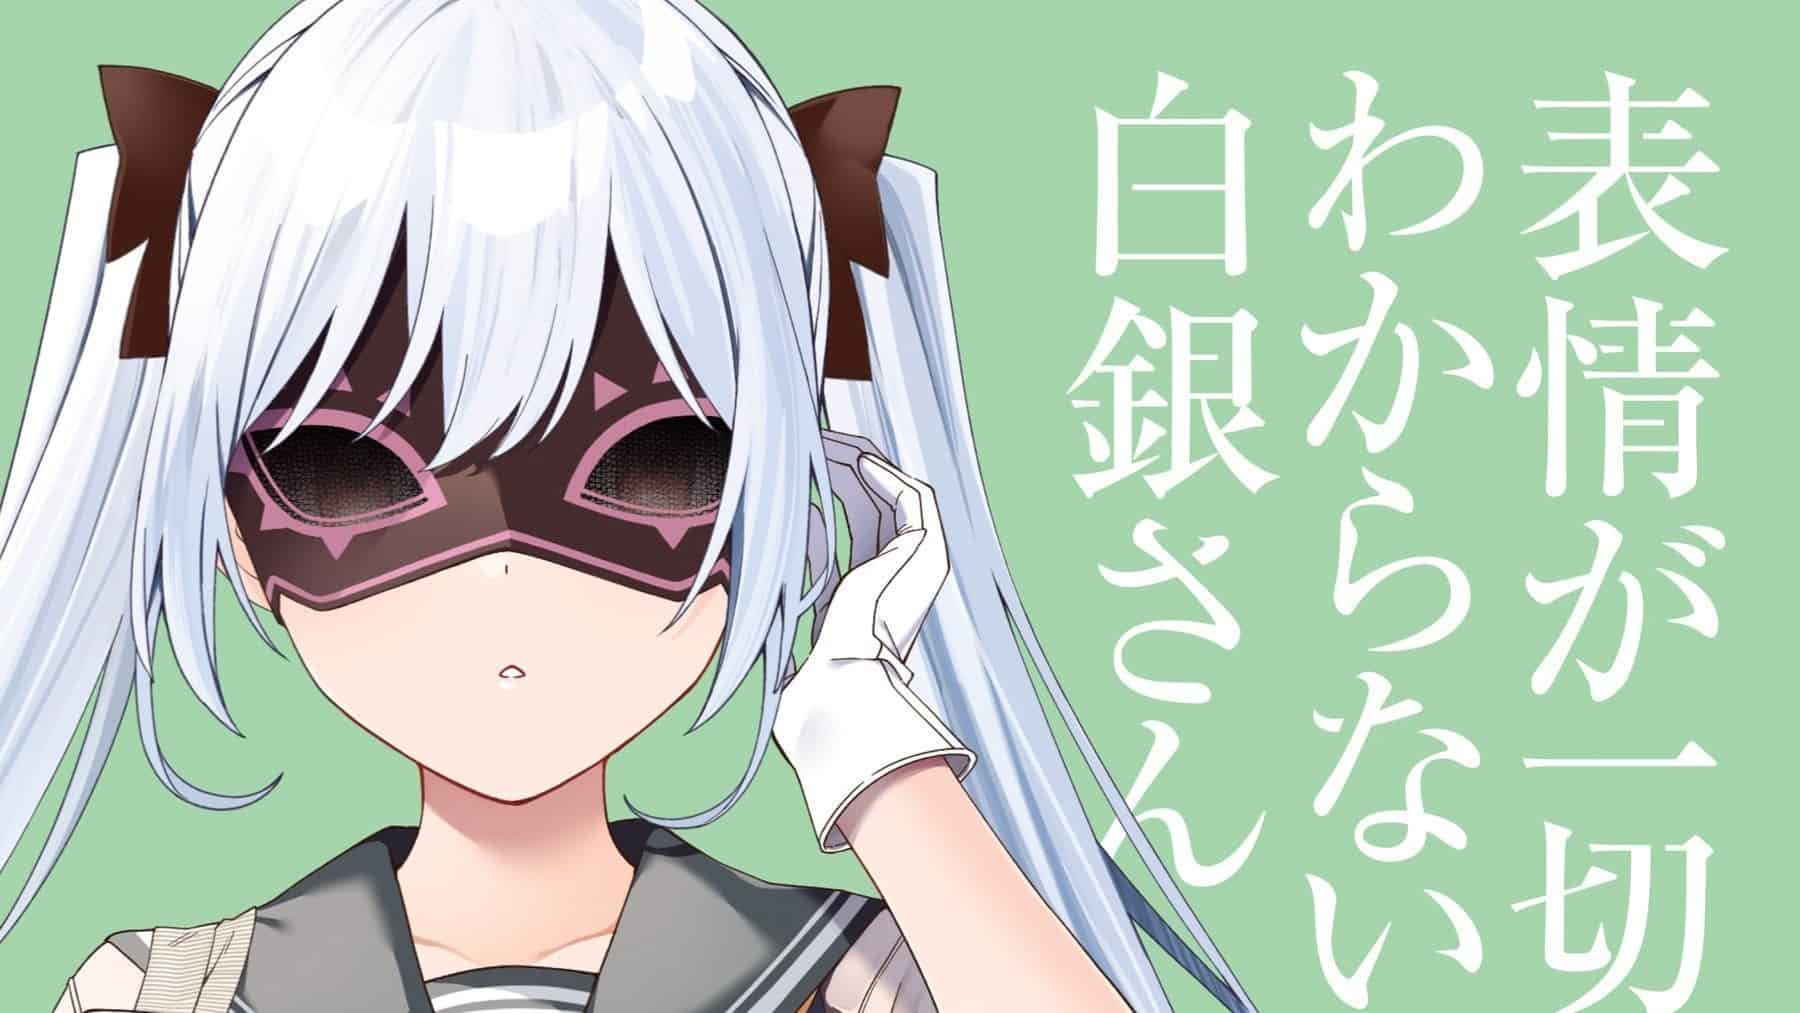 I Don’t Understand Shirogane-san’s Facial Expression at All Chapter 24 Release Date